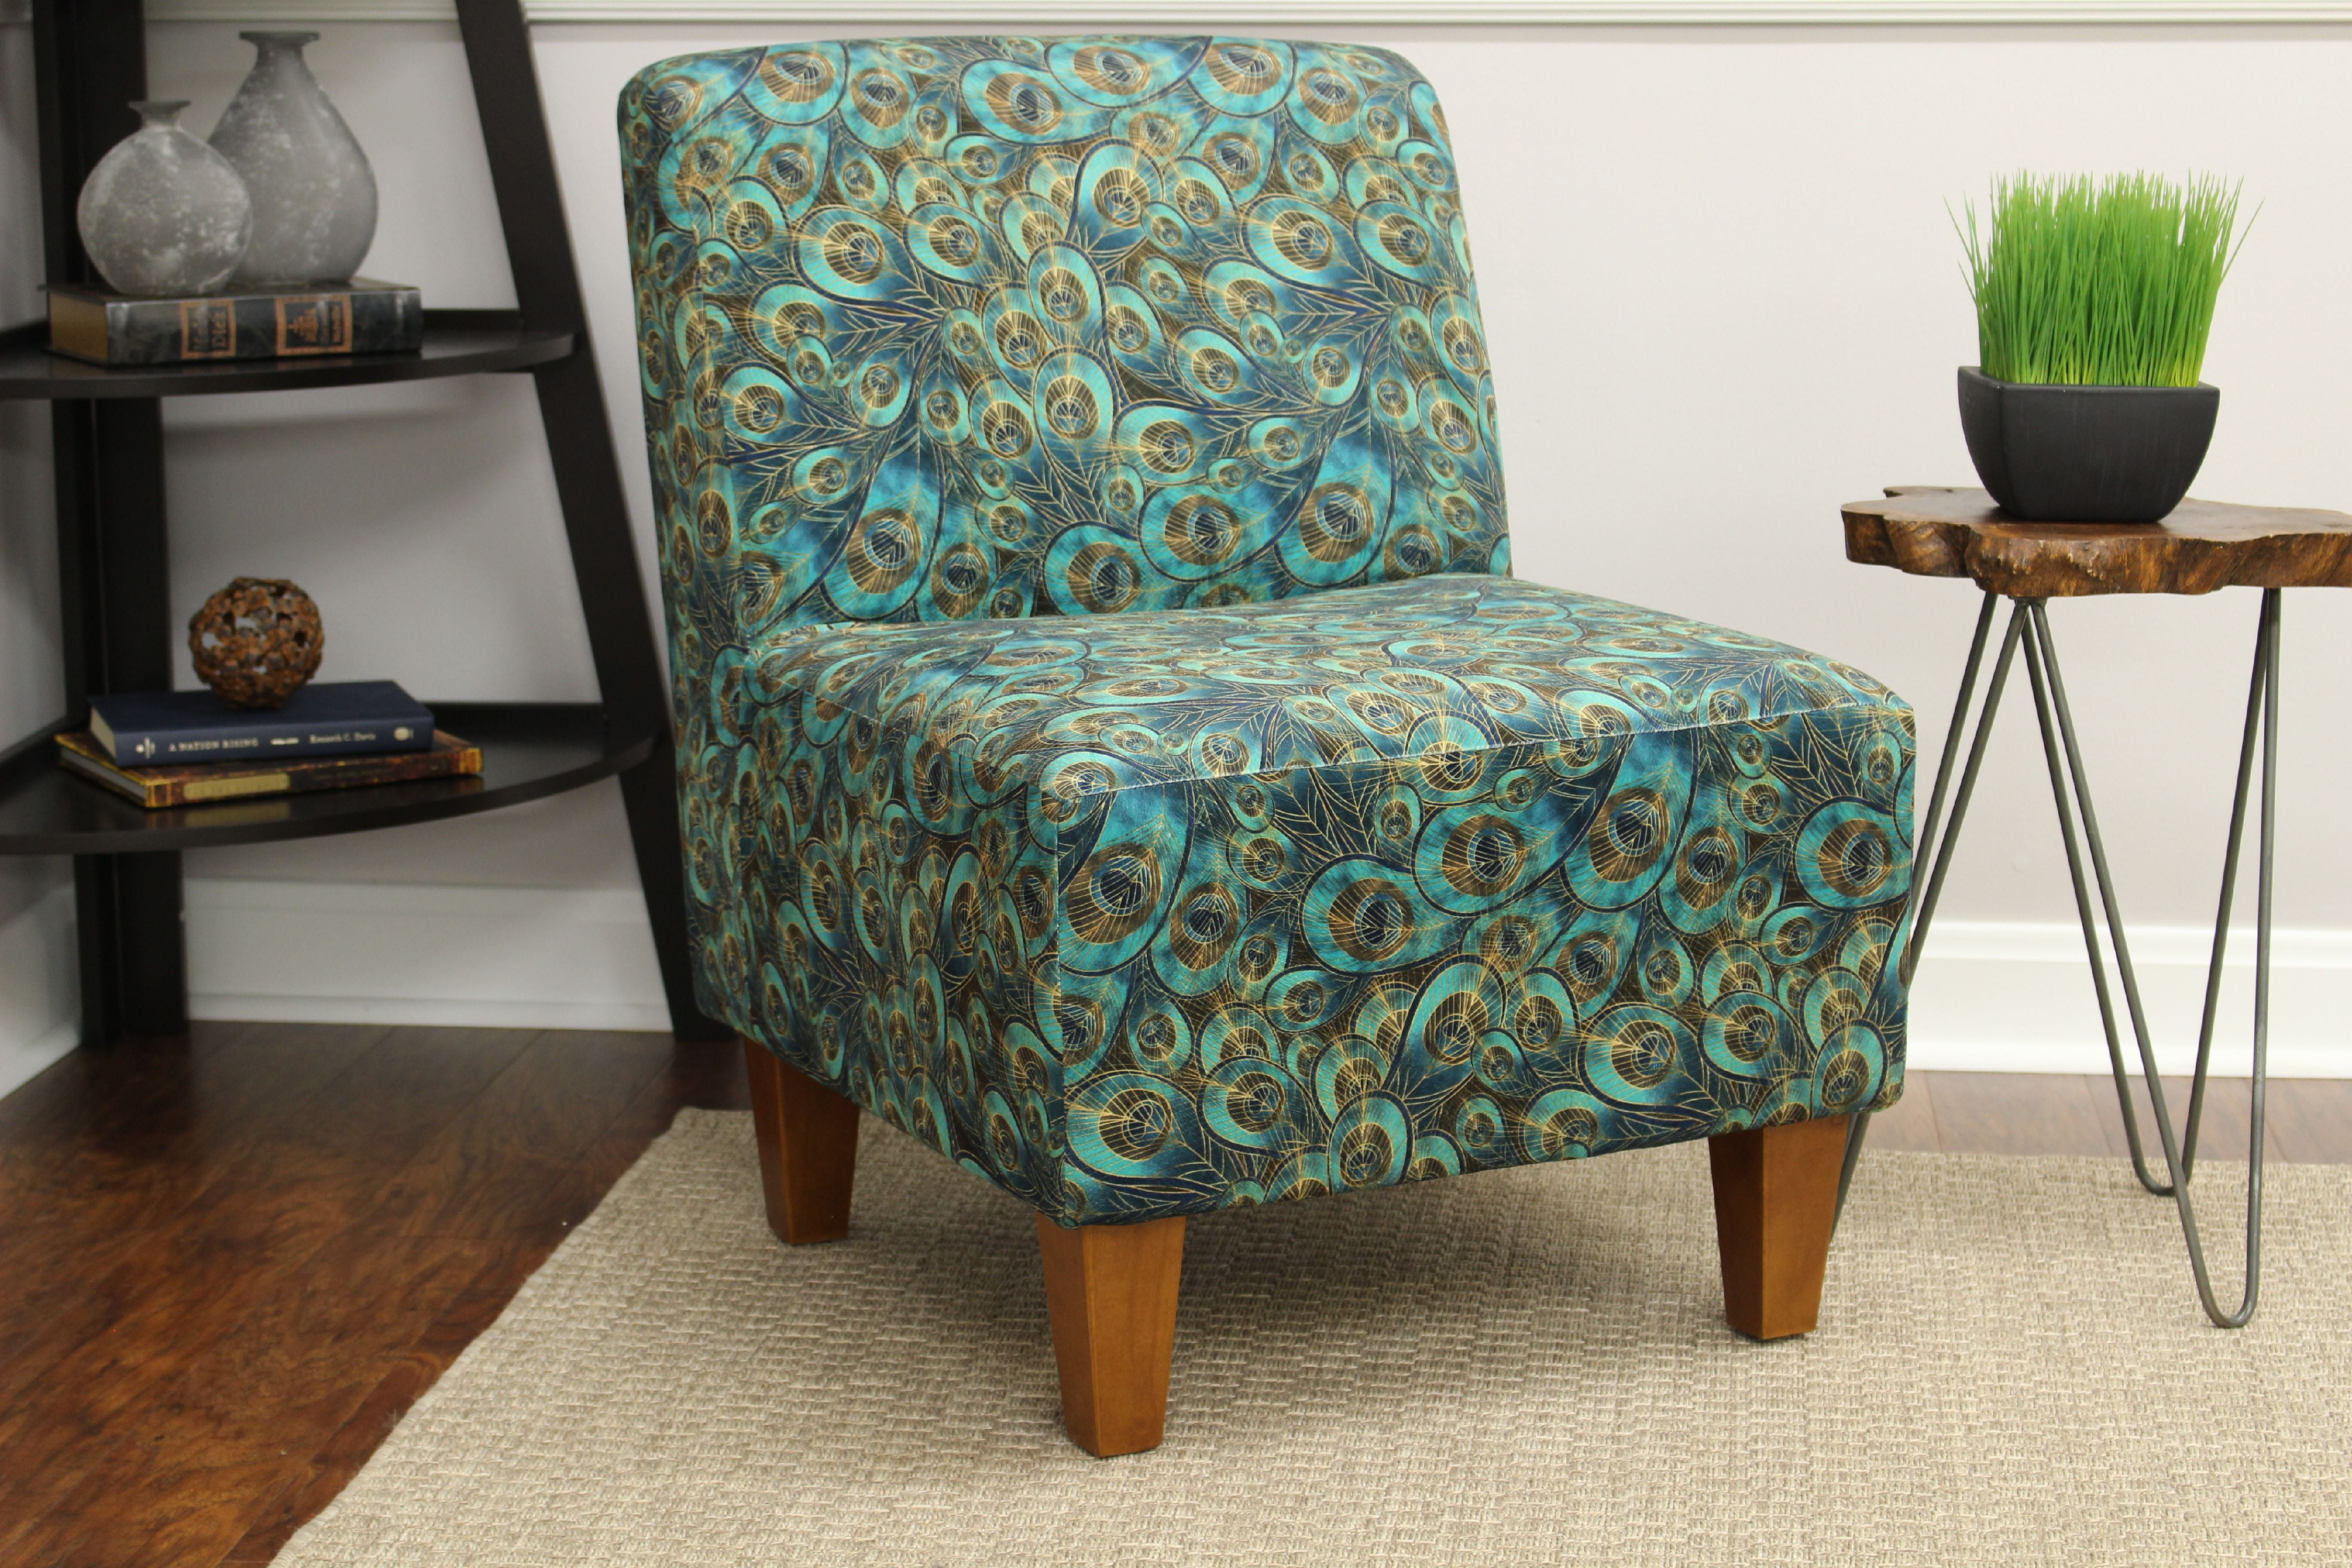 mainstays living room chair 179